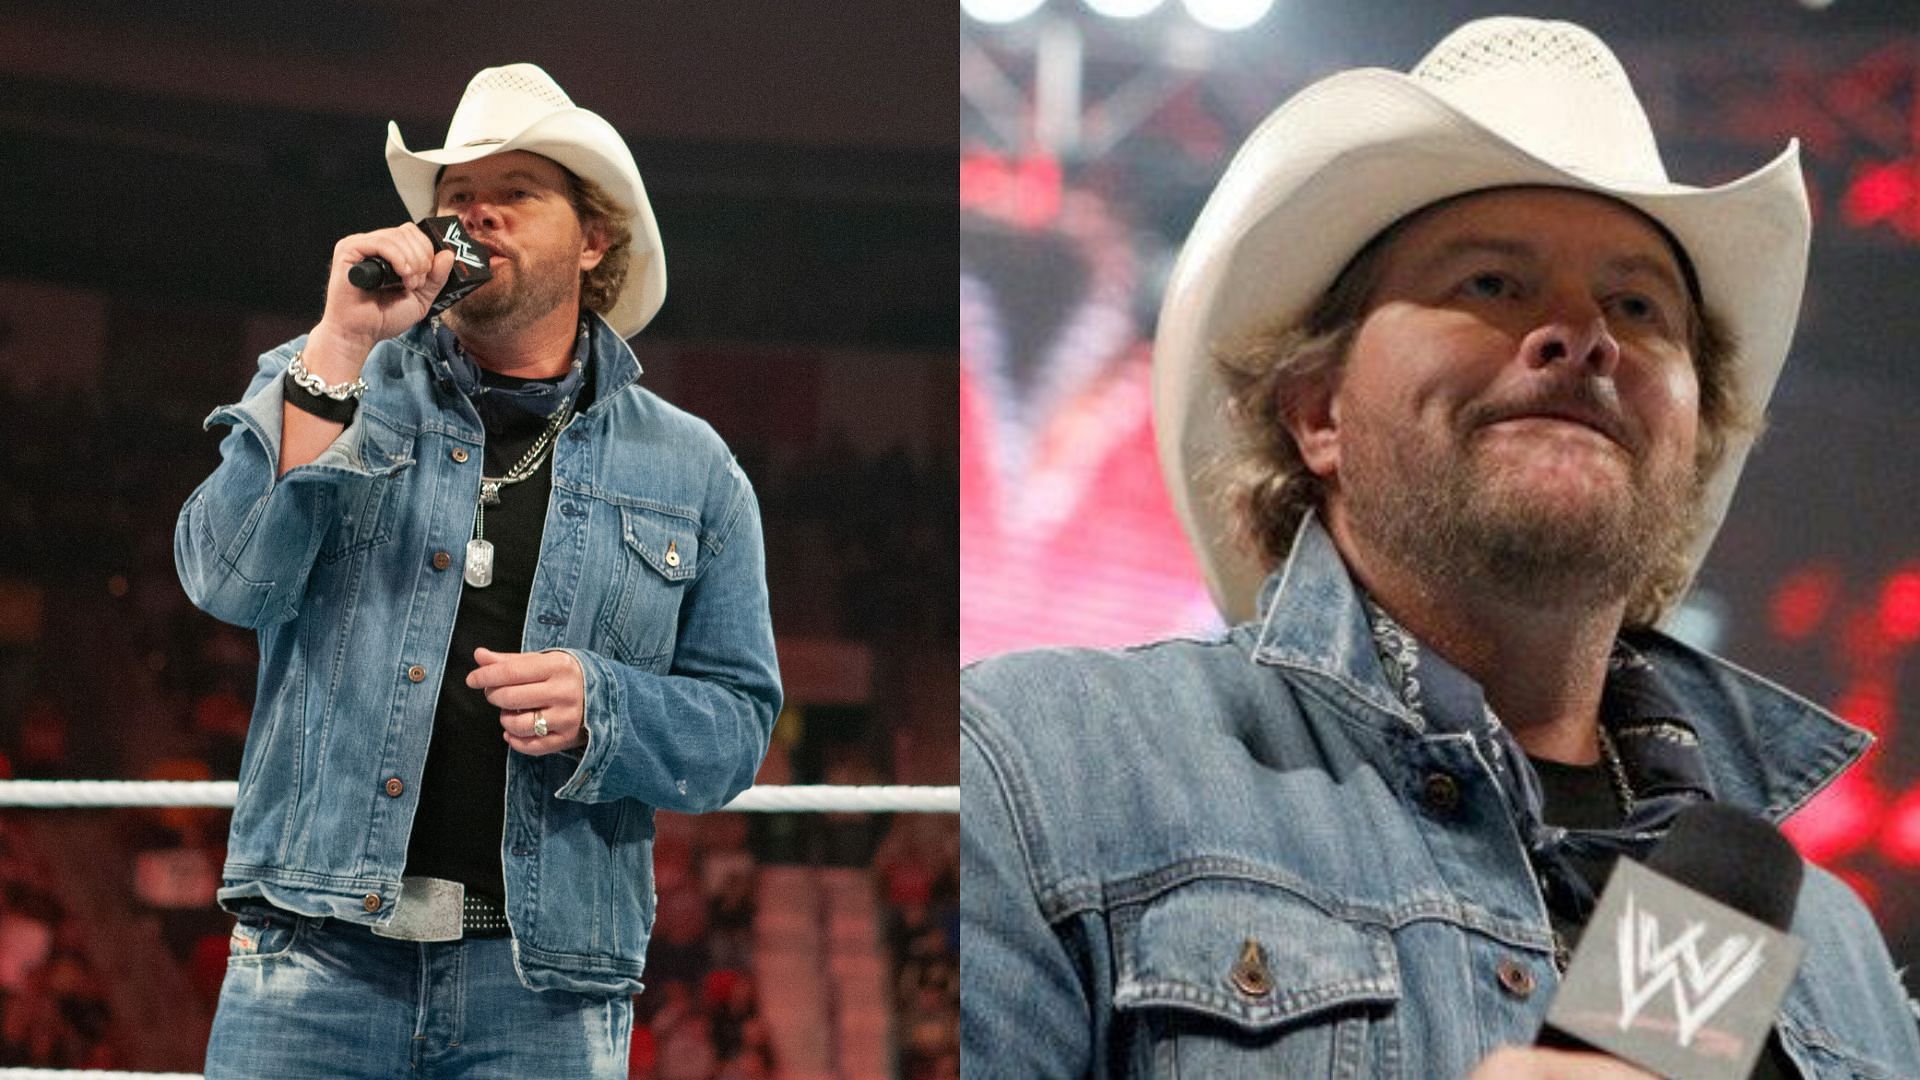 Legendary country music singer Toby Keith during his WWE appearance.